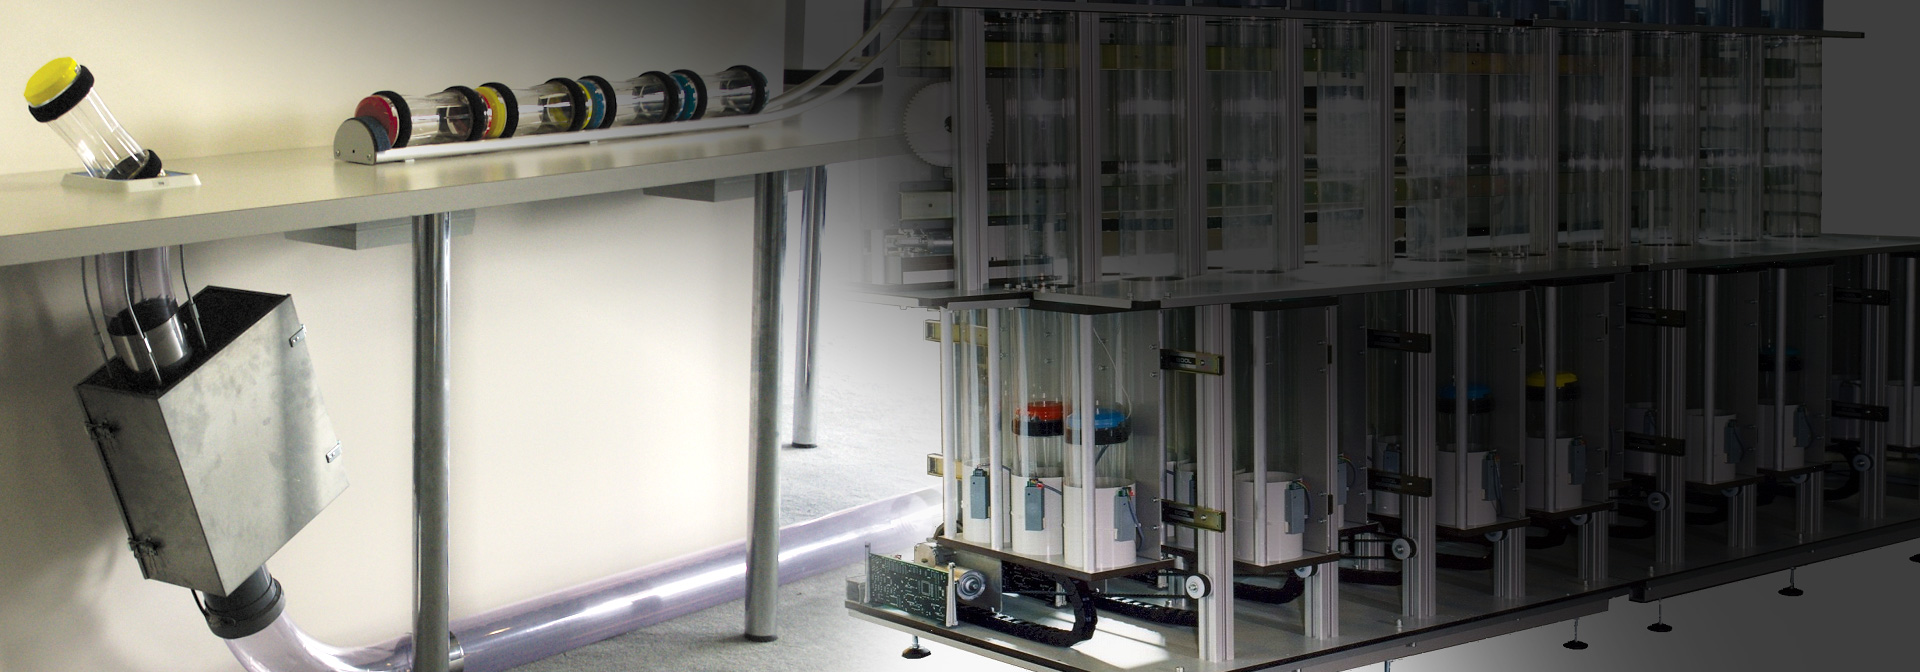 air tube system for plastic samples - Telecom Tube Systems